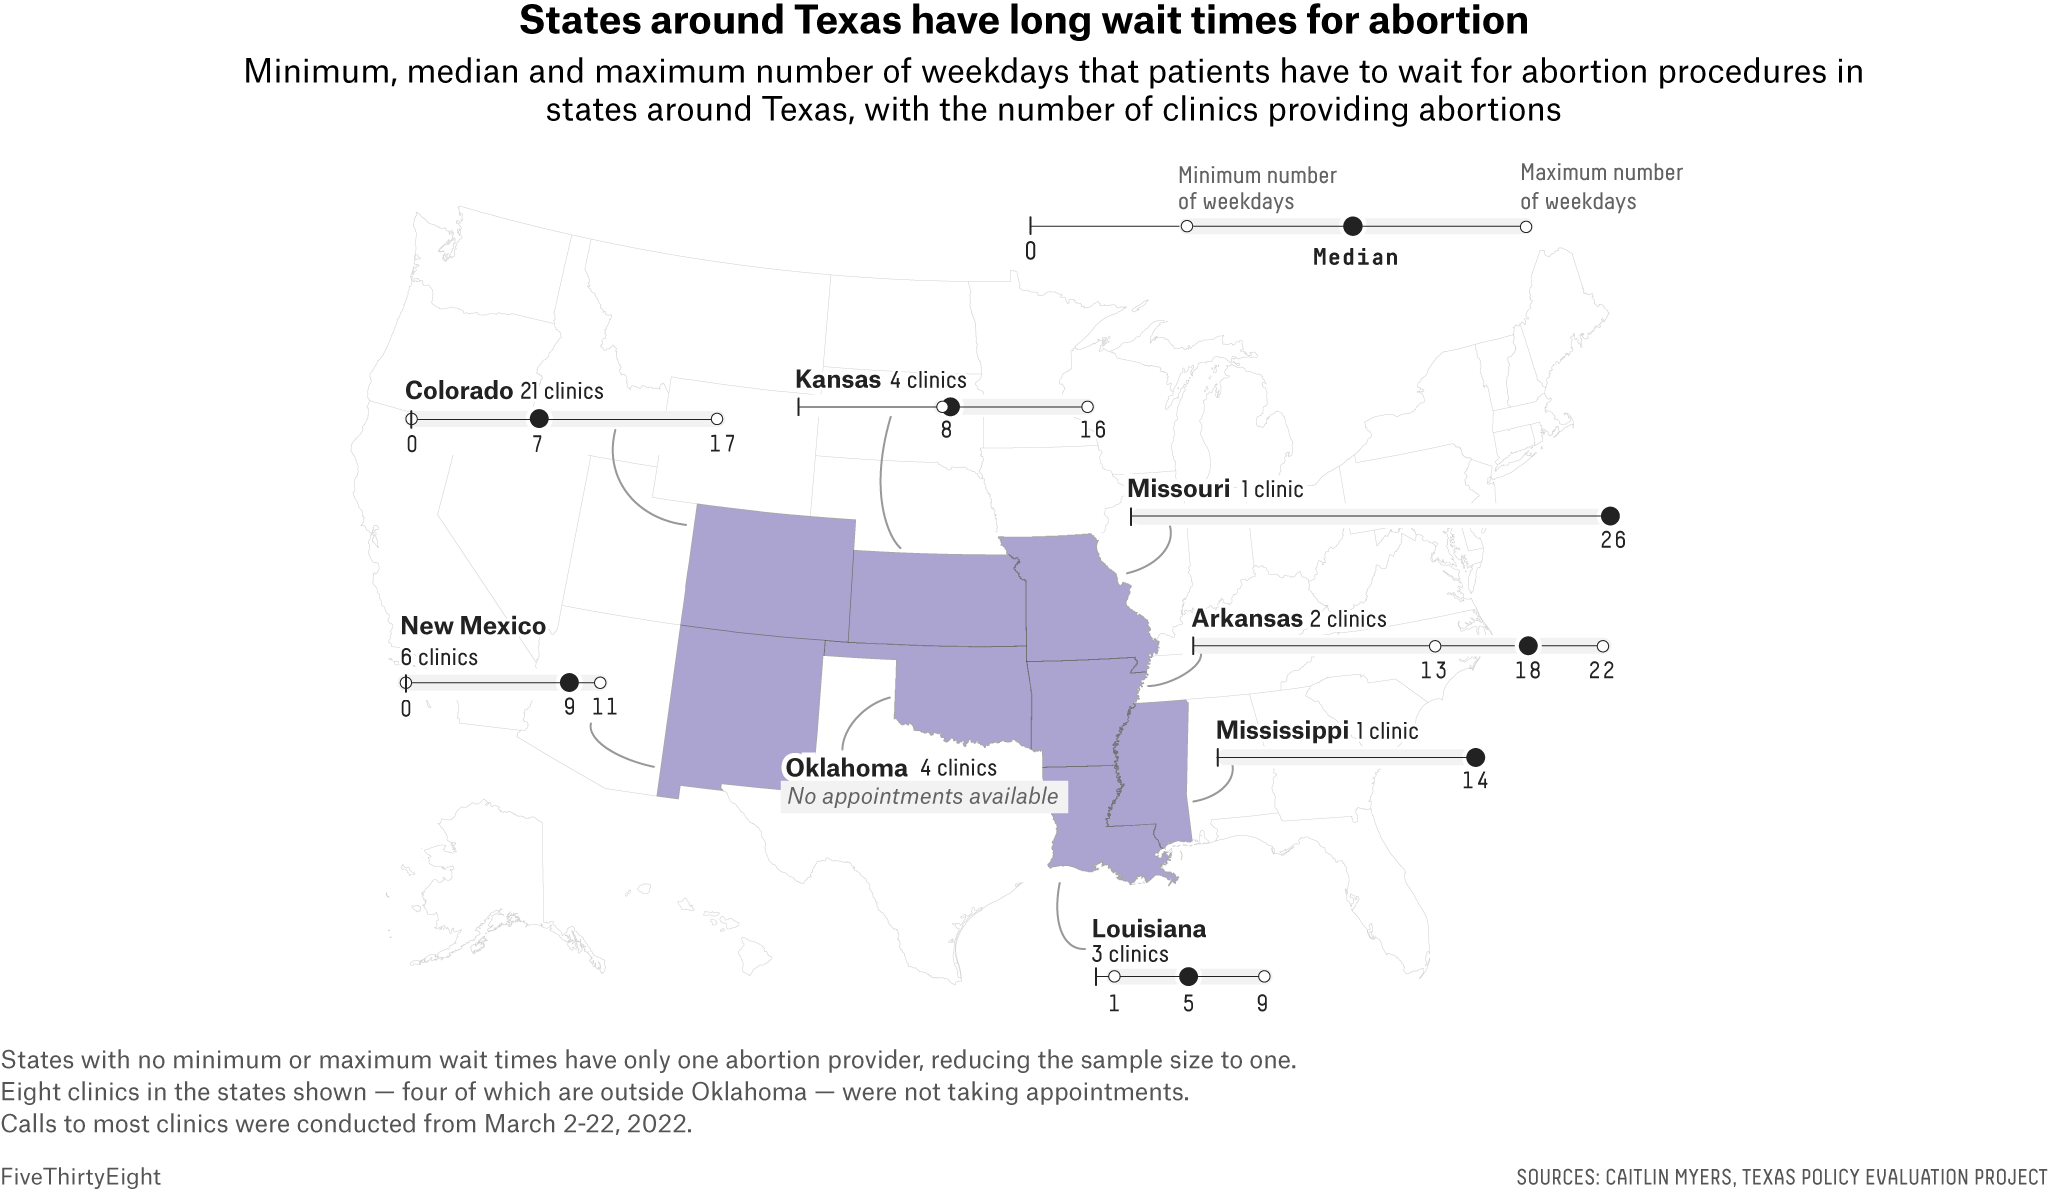 A map shows the wait times for states surrounding Texas. Missiouri, with only one clinic, has by far the longest wait time for an abortion. 